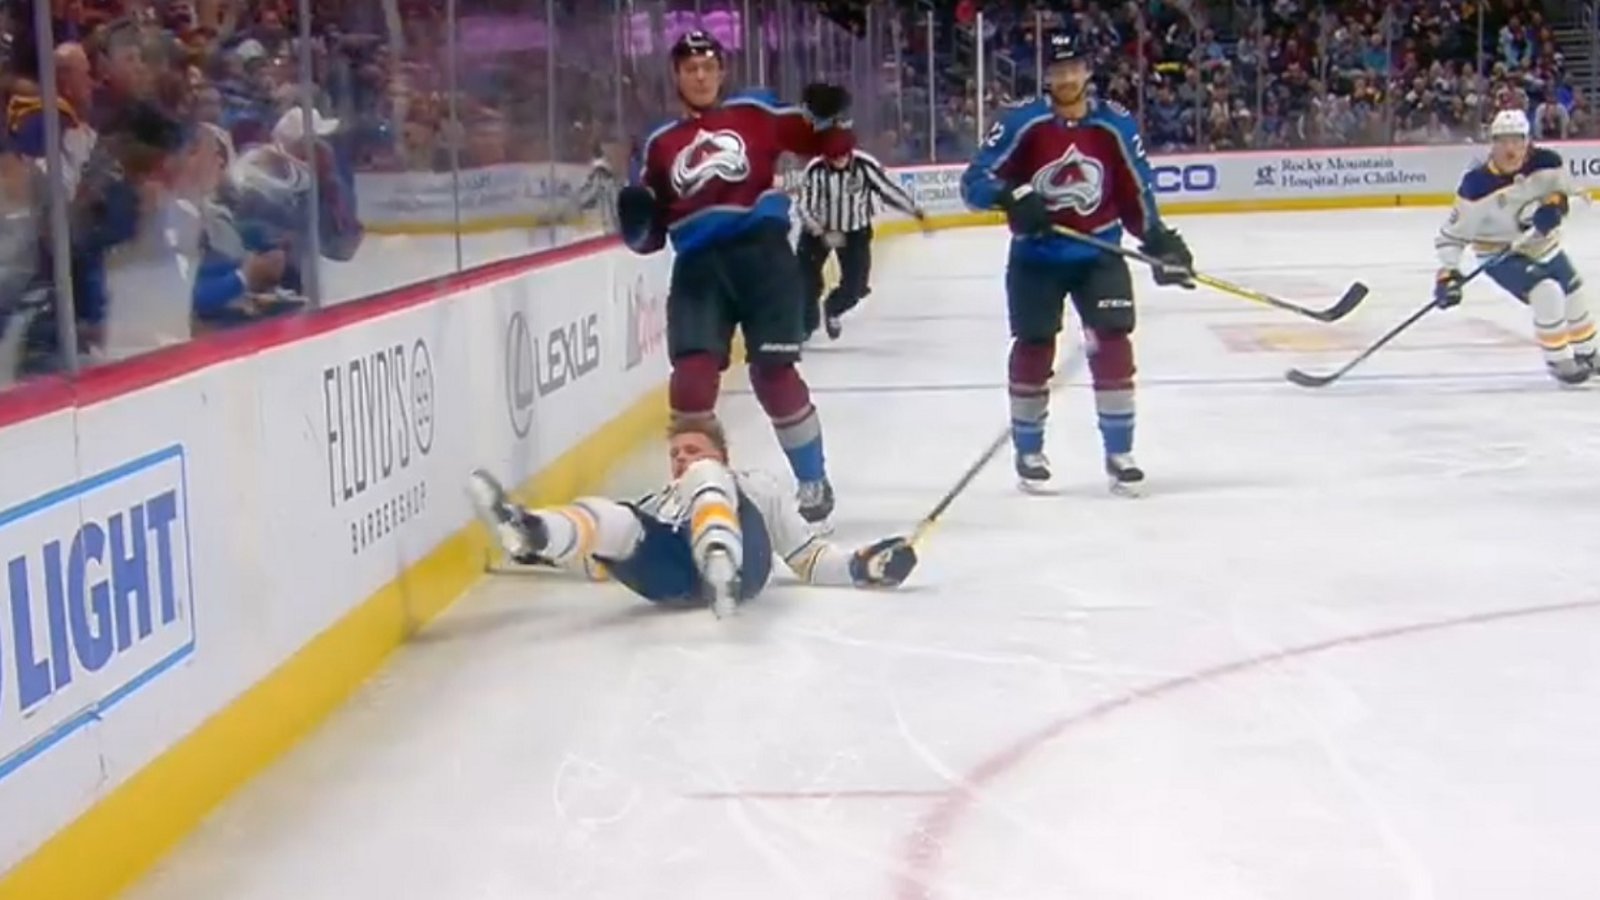 Zadorov levels Jack Eichel after the whistle has blown.